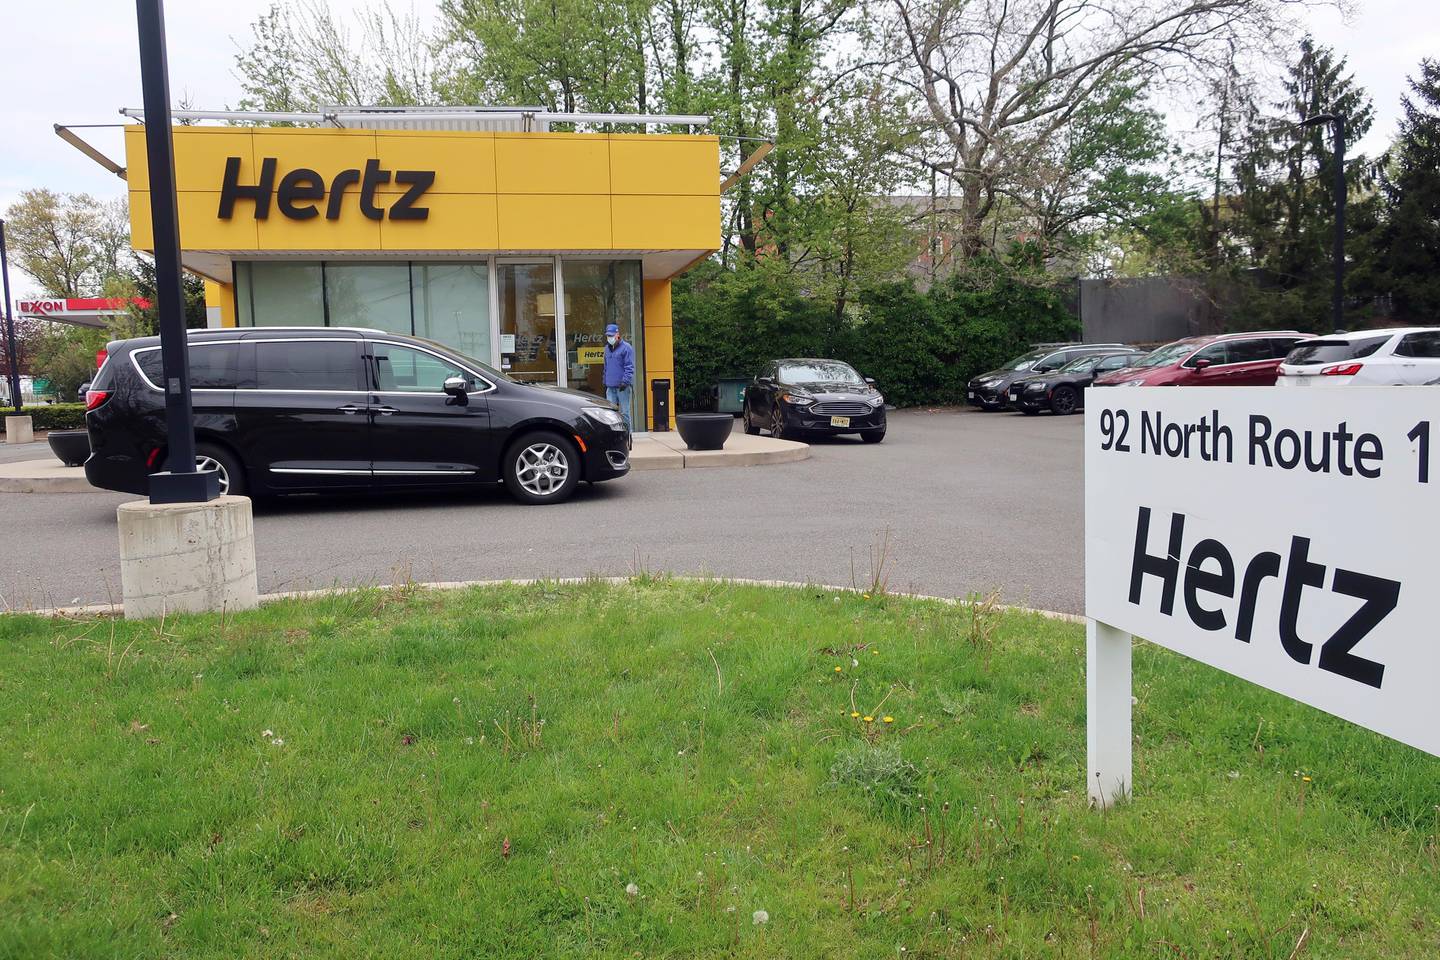 FILE - In this May 6, 2020, file photo, a Hertz car rental is closed during the coronavirus pandemic in Paramus, N.J. Hertz filed for bankruptcy protection Friday, May 22, 2020, unable to withstand the pandemic that has crippled global travel and with it, the heavily indebted 102-year-old car rental company's business. (AP Photo/Ted Shaffrey, File)